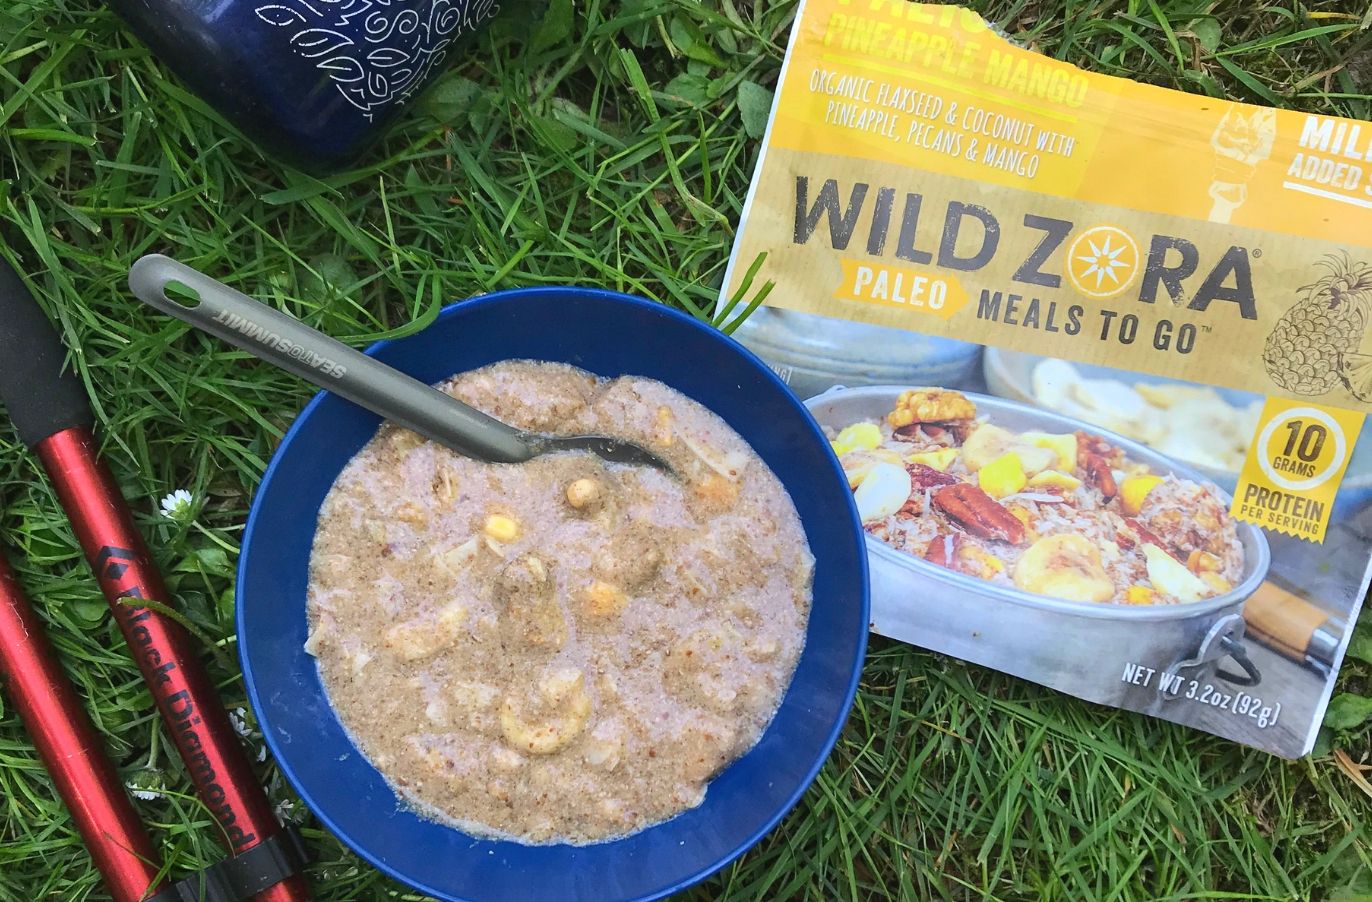 Wild Zora paleo meals to go package beside a bowl of paleo porridge on a grassy surface